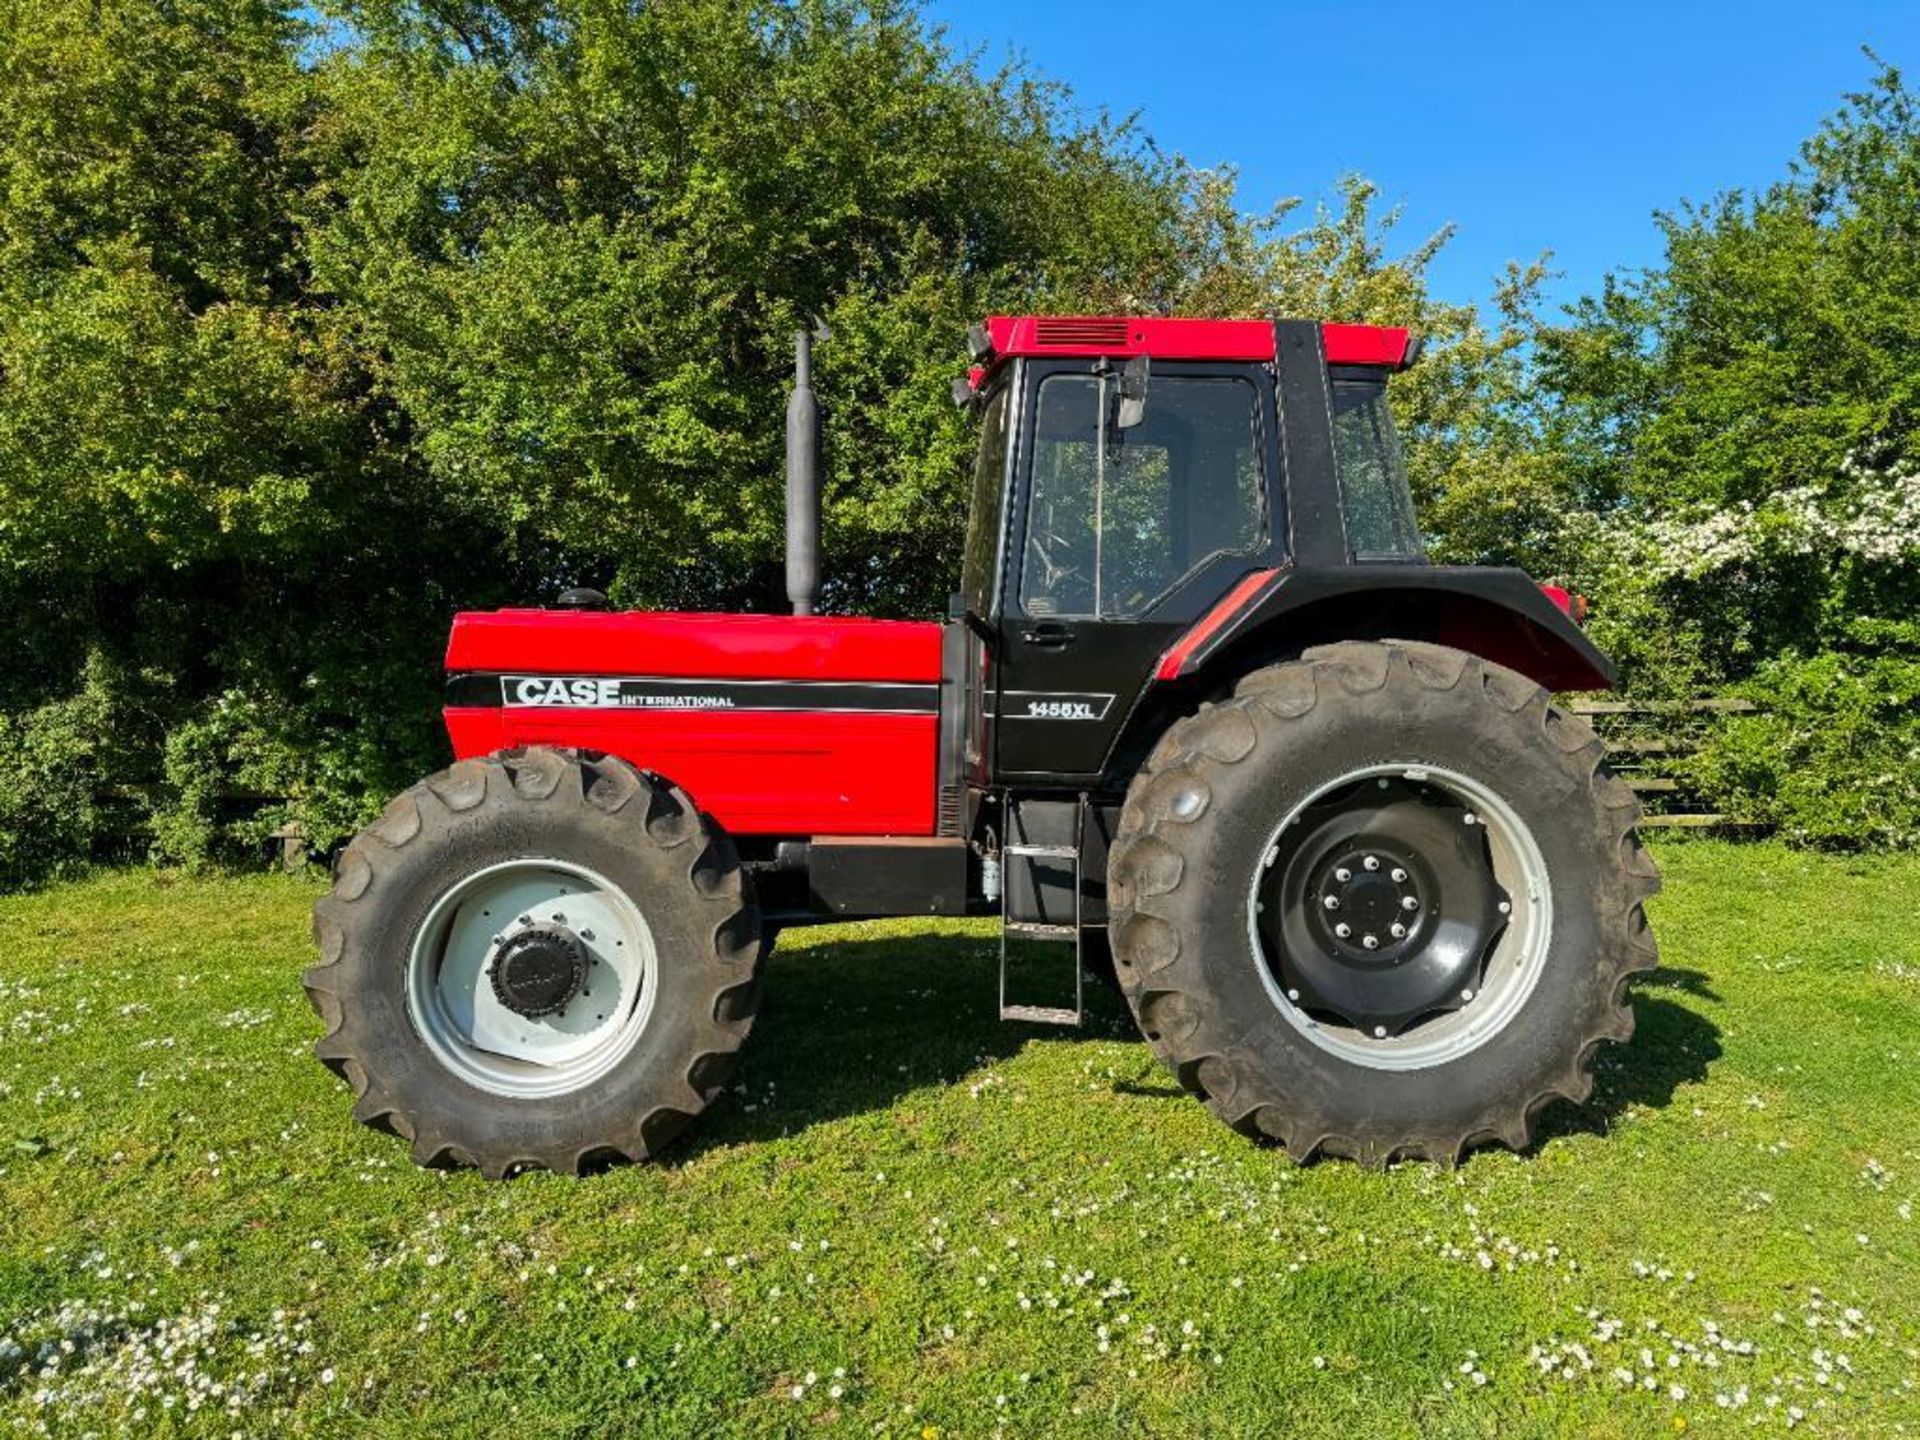 1987 Case International 1455XL 4wd tractor with 14no front wafer weights, 2 manual double acting spo - Image 16 of 26